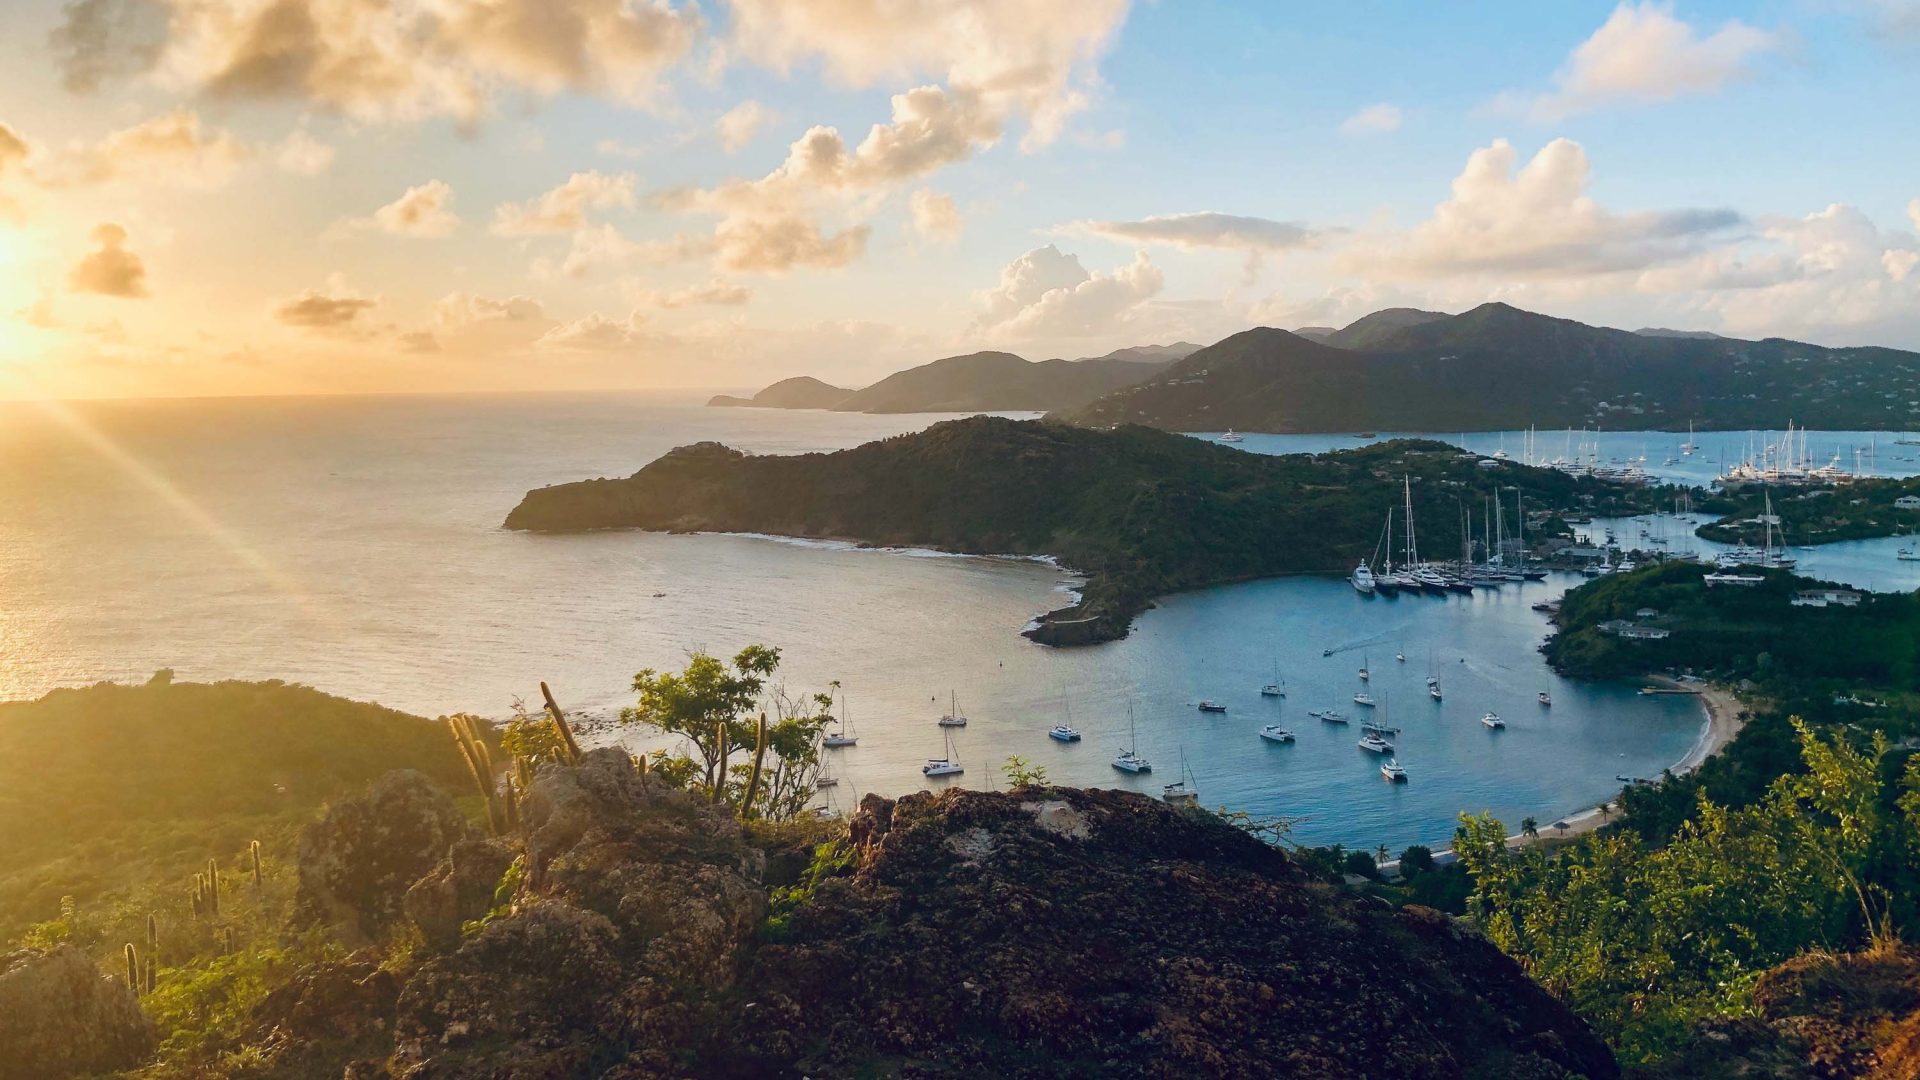 Hope for the best, prepare for the worst: 24 hours on a family vacation in Antigua